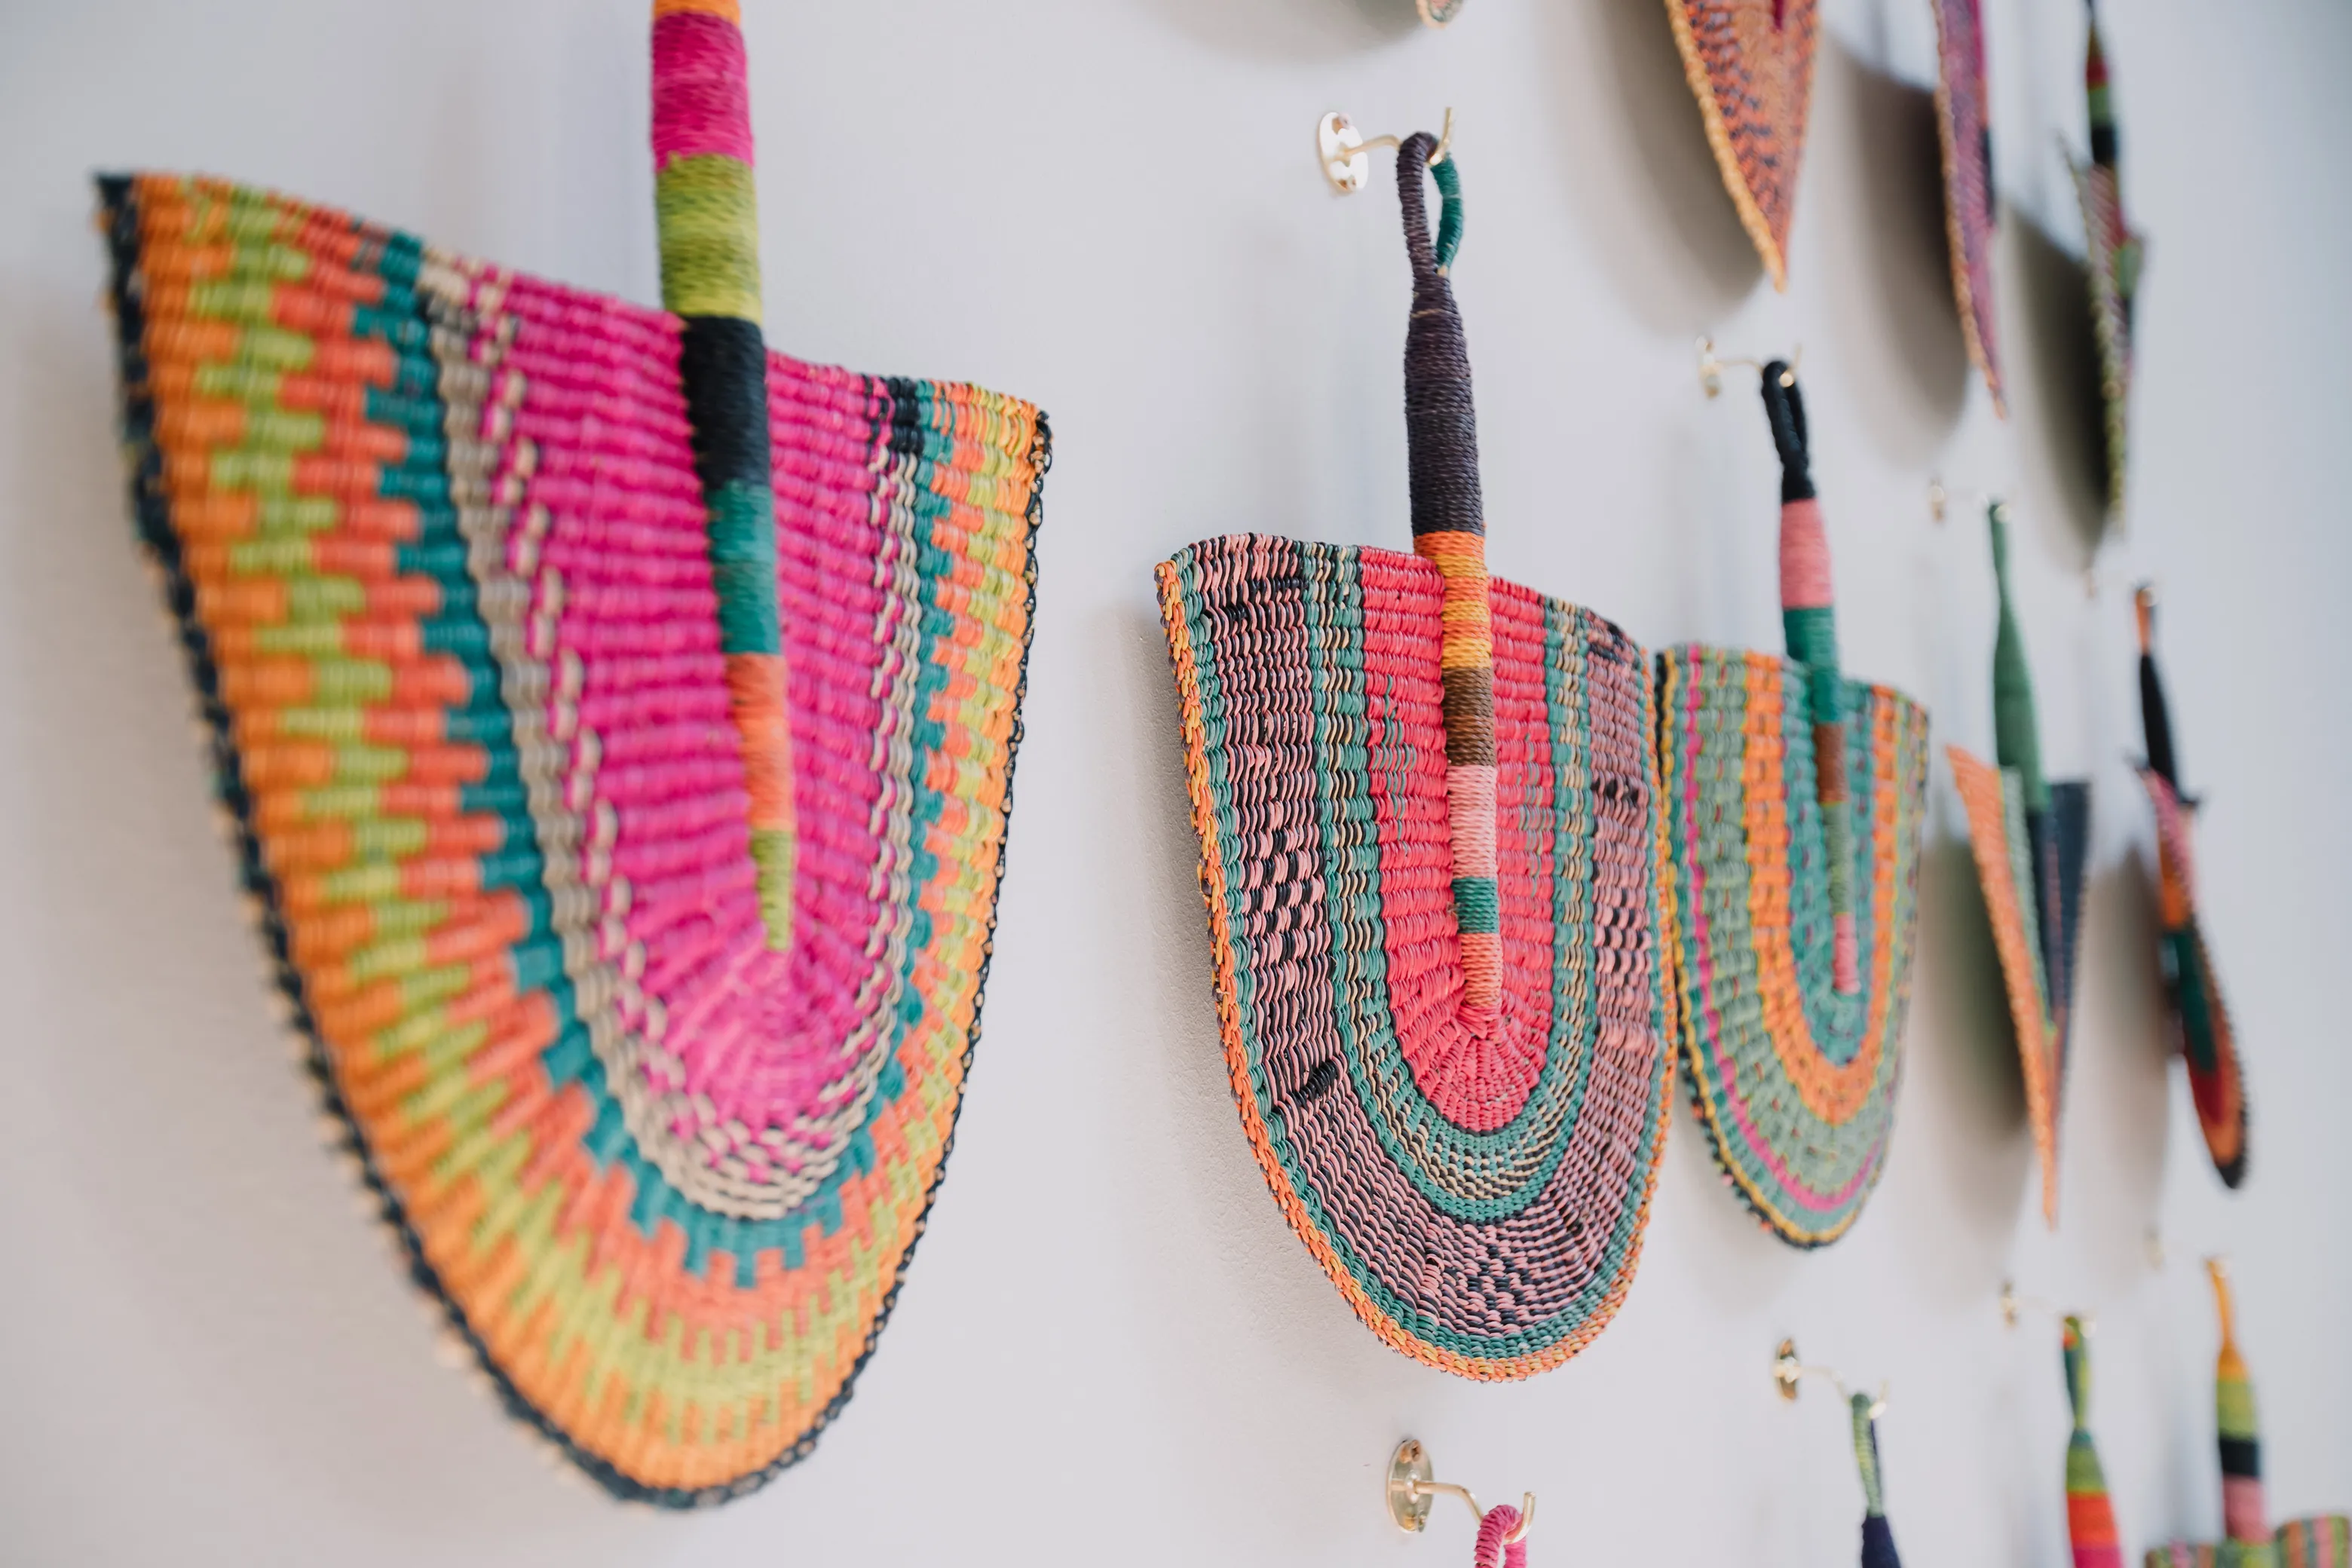 Colorful woven African decorations hung on a wall.